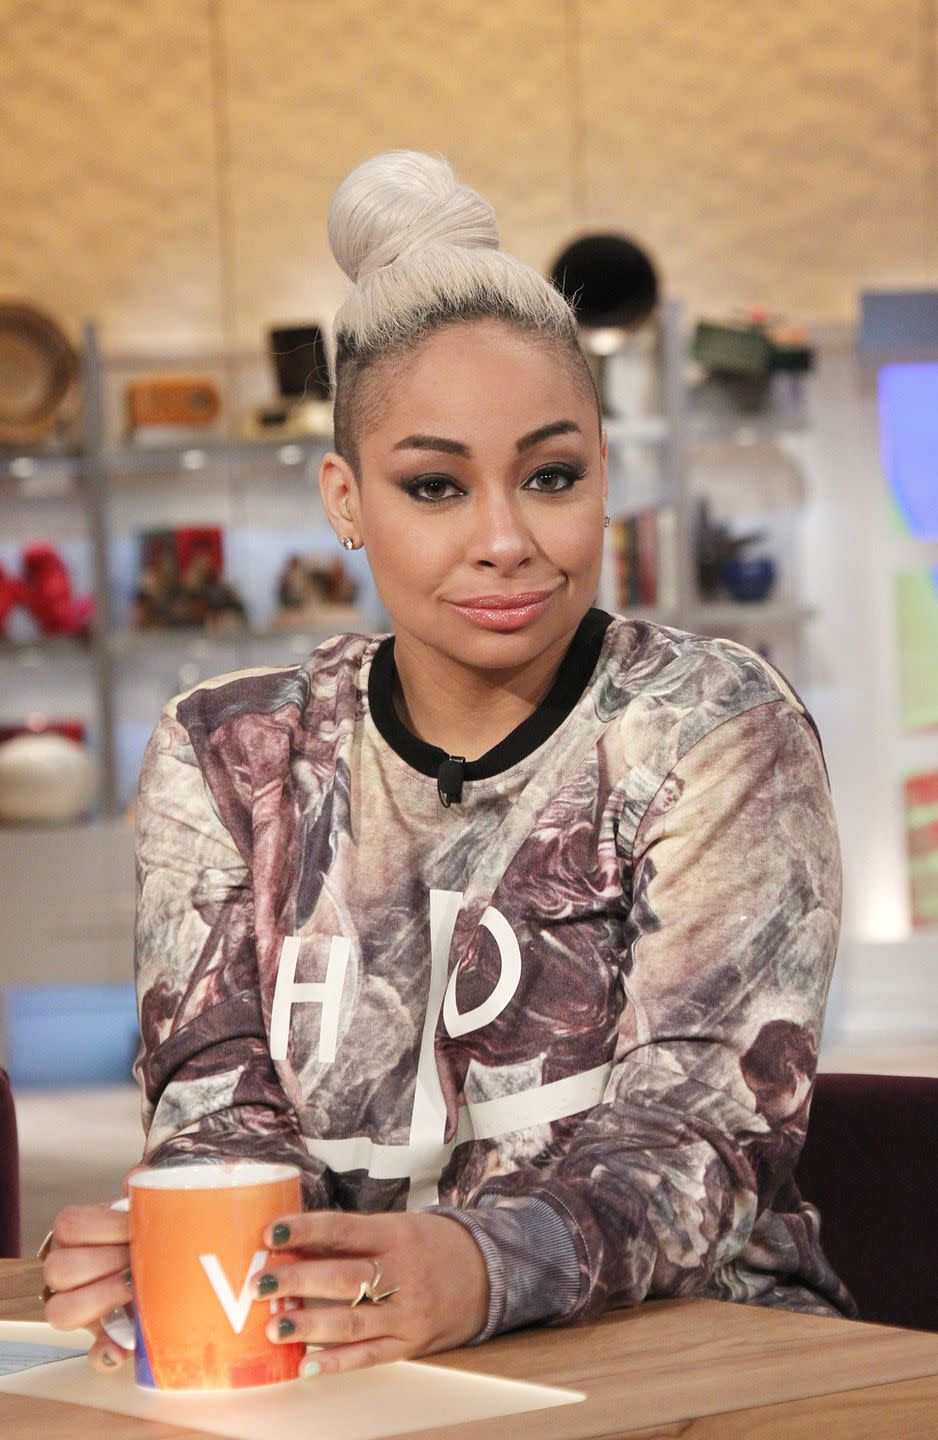 When viewers petitioned to get Raven-Symoné fired.